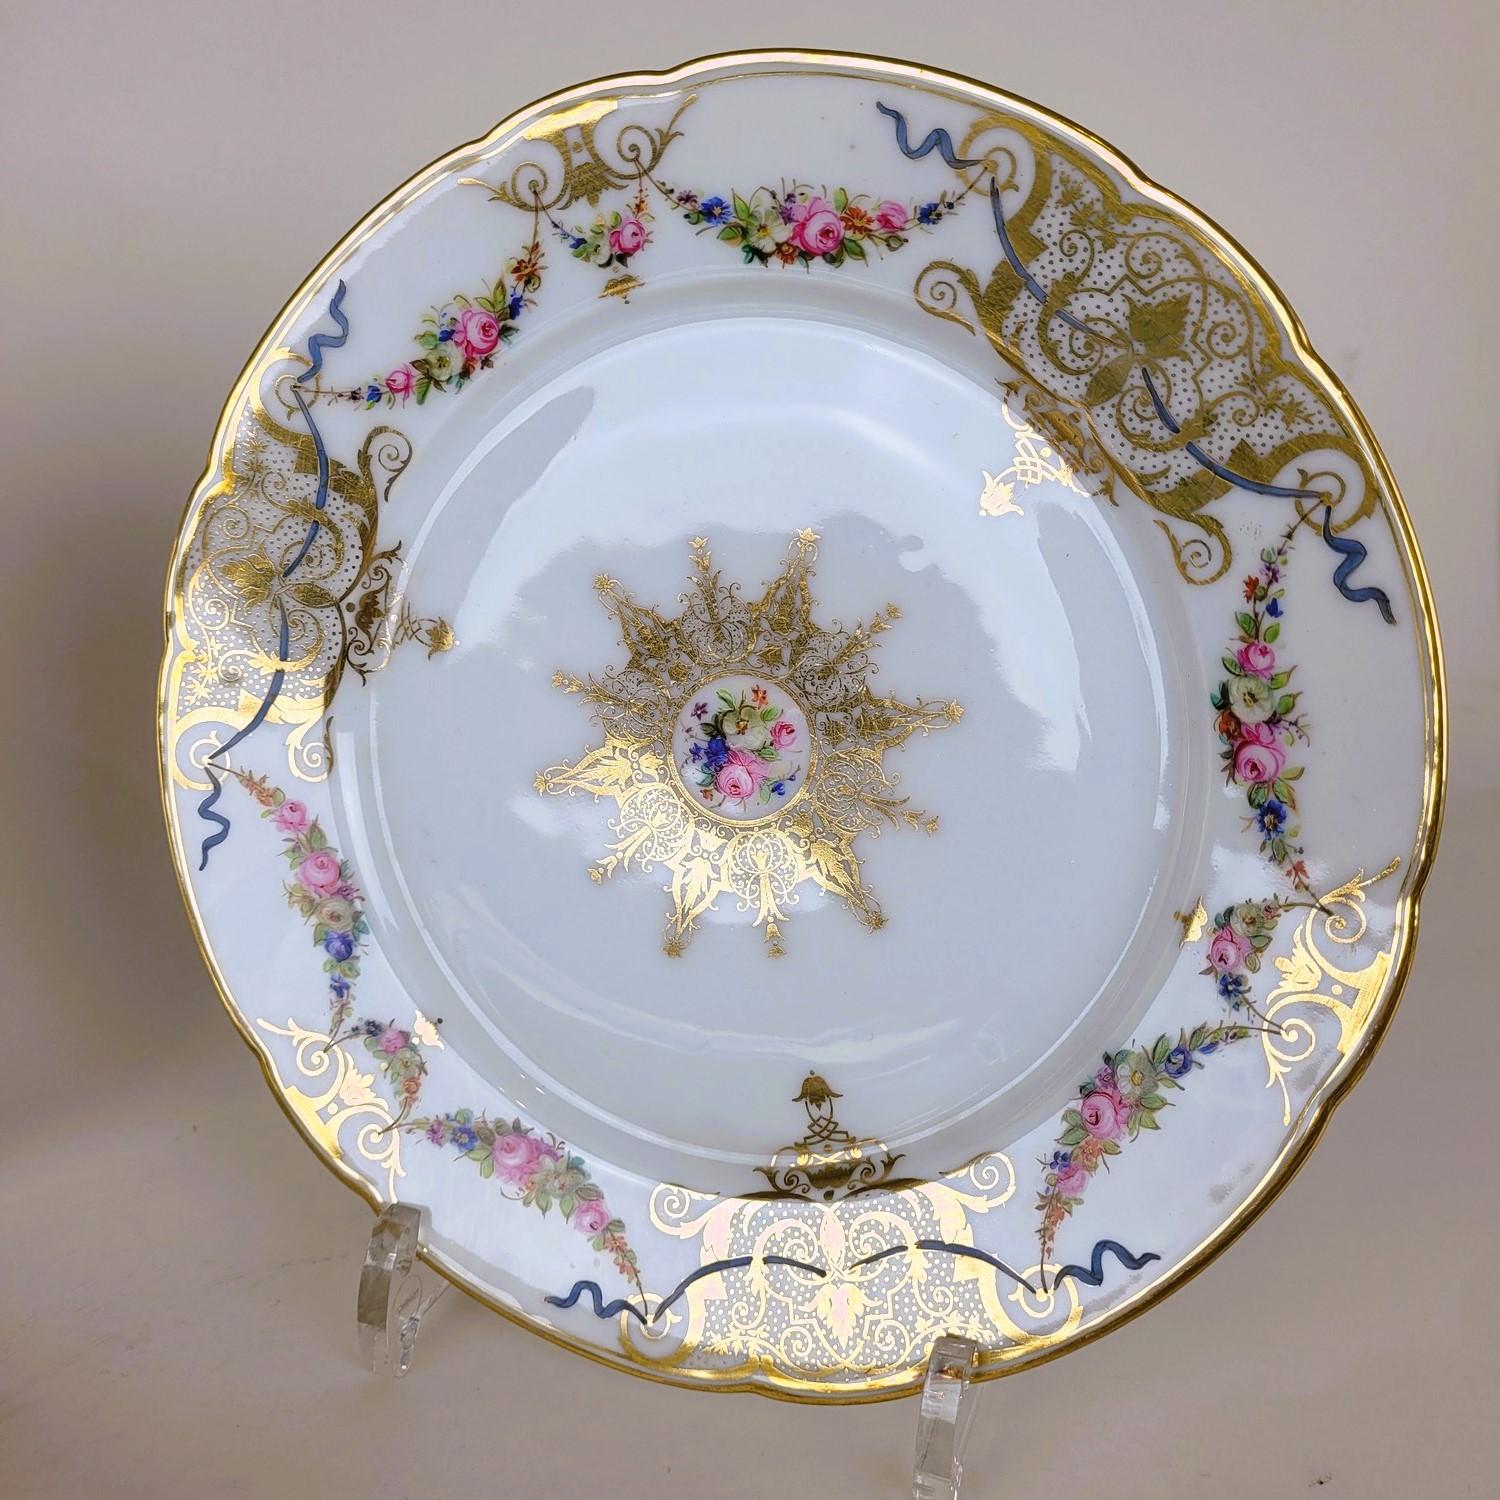 Set of 12 elegant white porcelain plates with a decoration of flowers, ribbons and colored rosettes, with gold highlights

Two are marked 